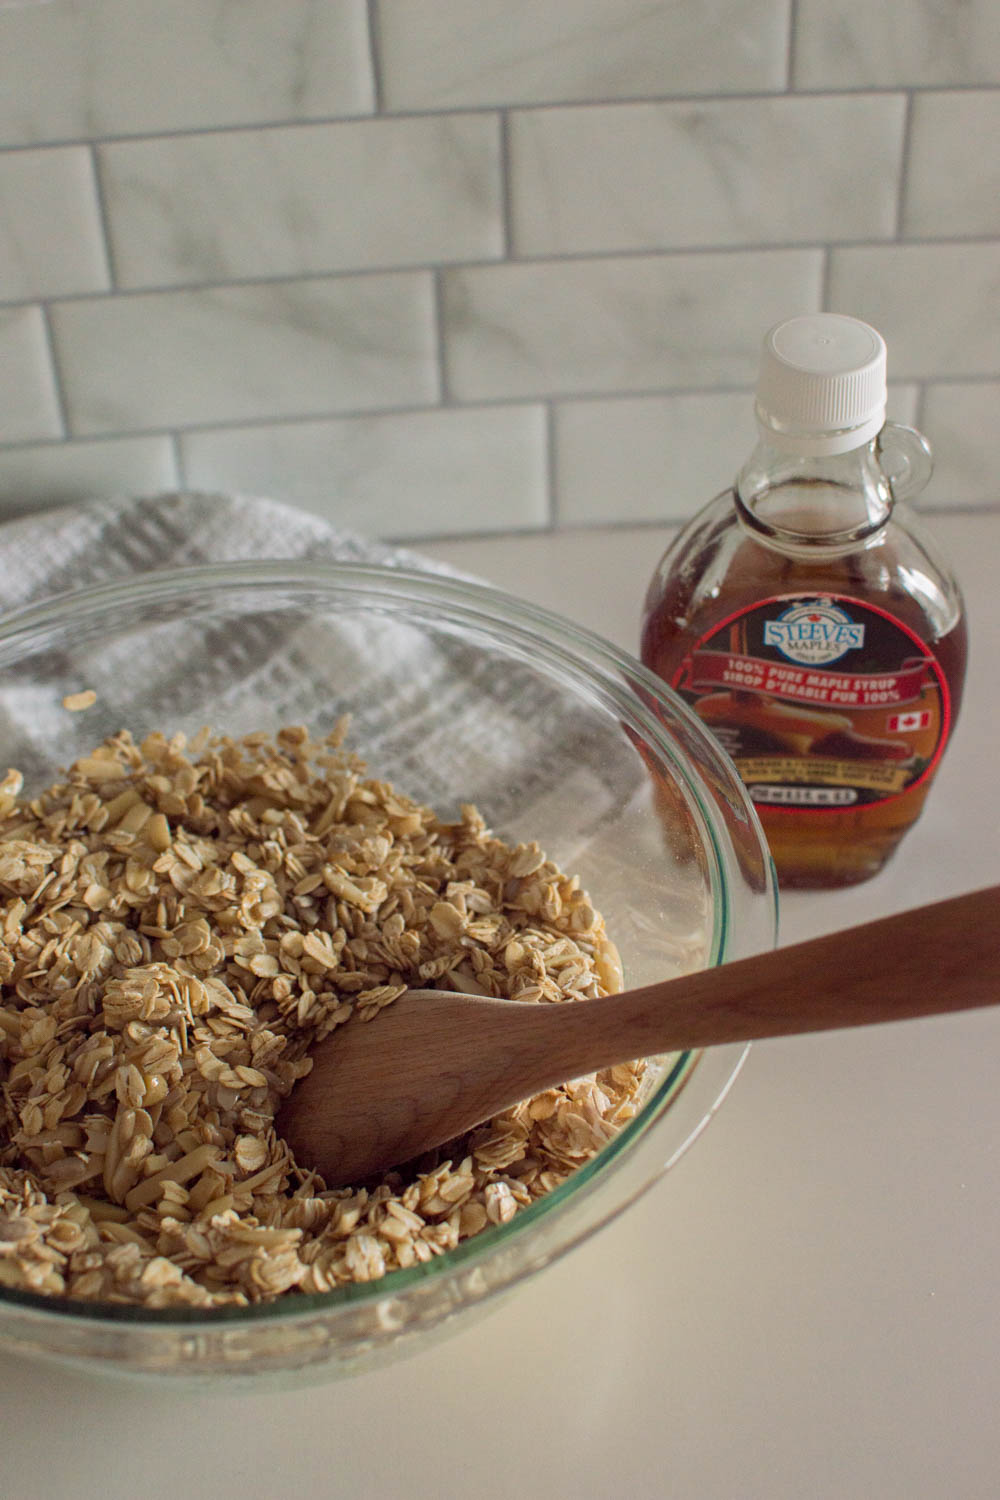 Using a wooden spoon to mix maple syrup into a granola mixture to make easy granola at home